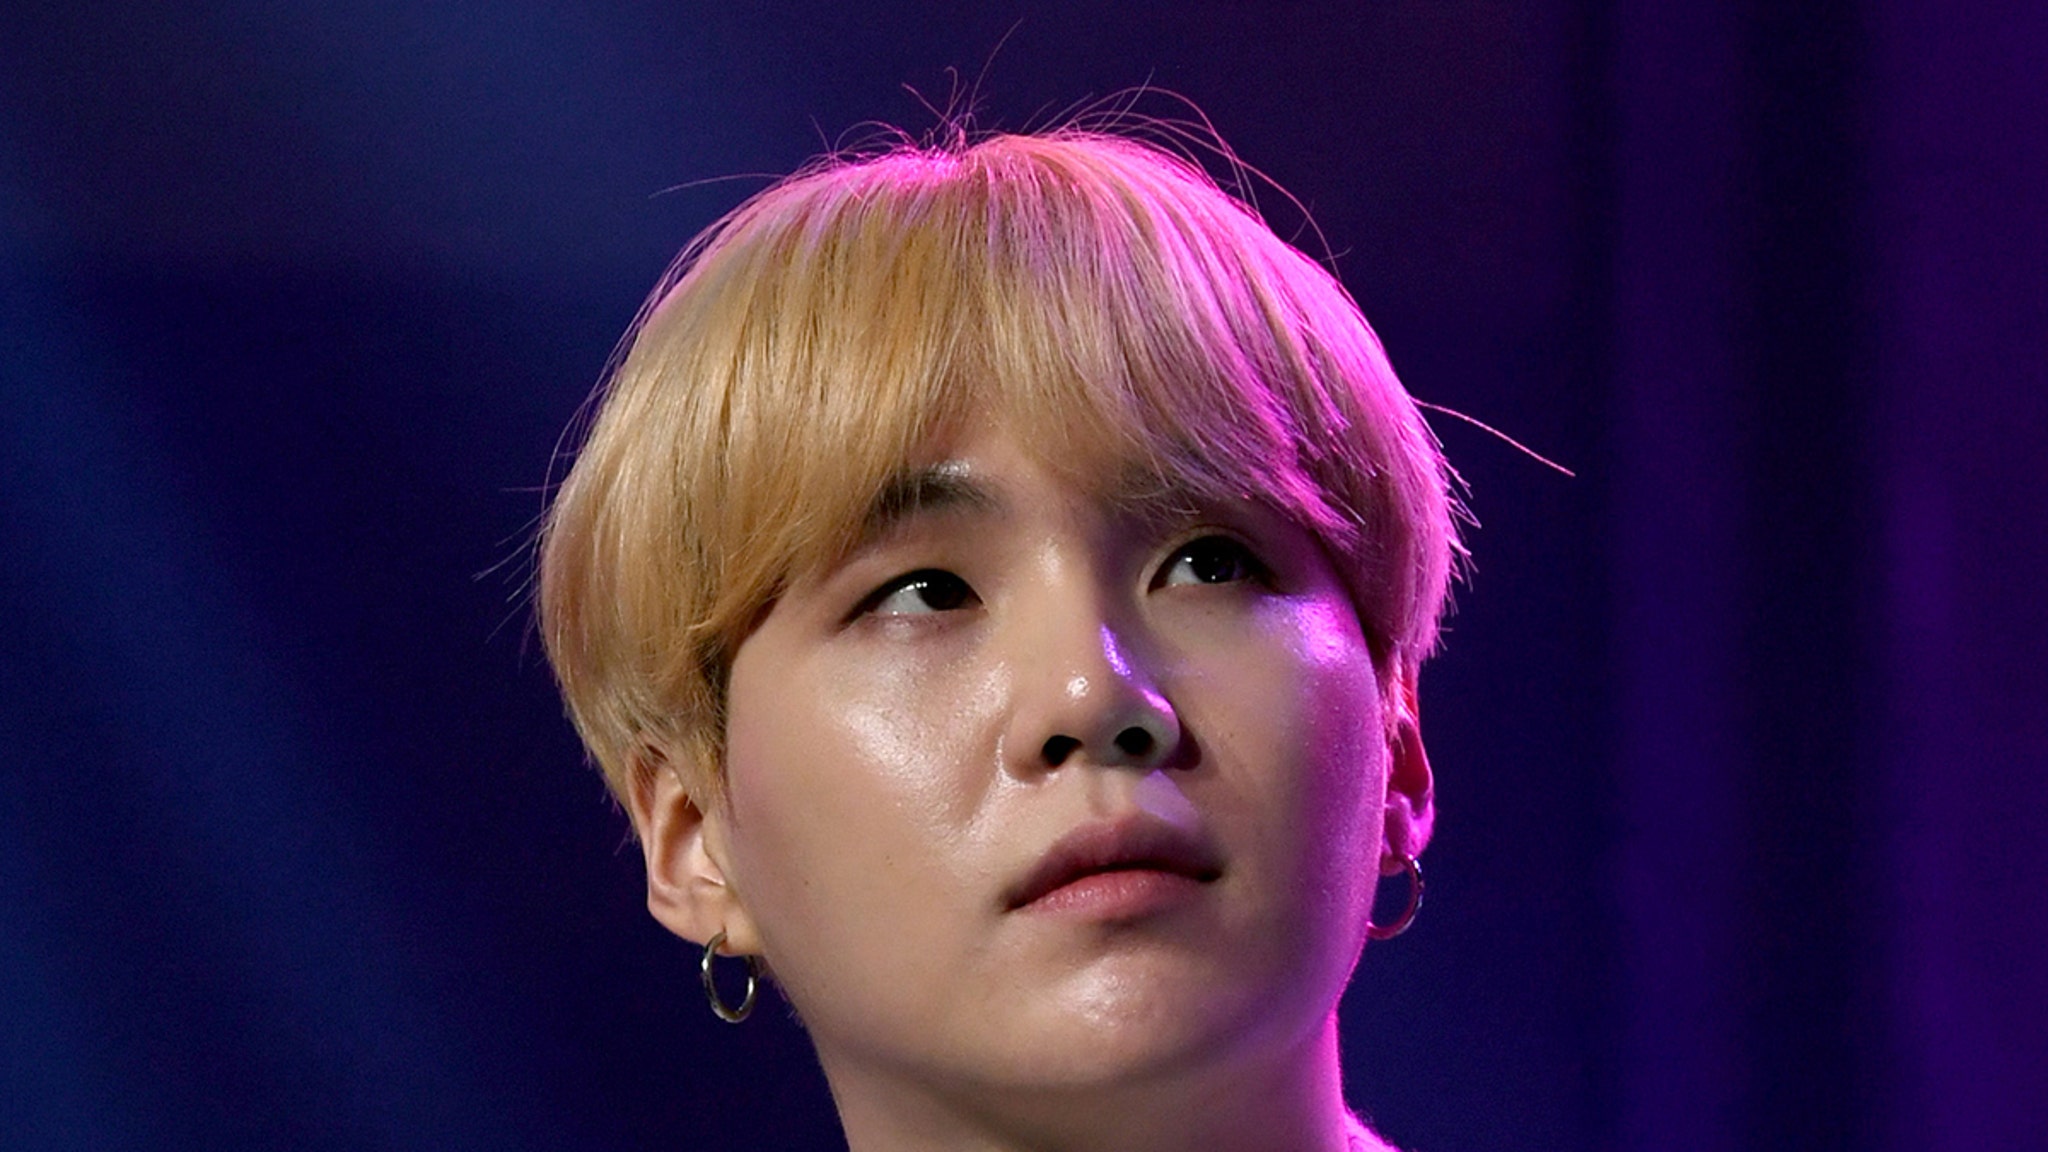 | BTS' Suga Tests Positive for Covid-19 | The Paradise